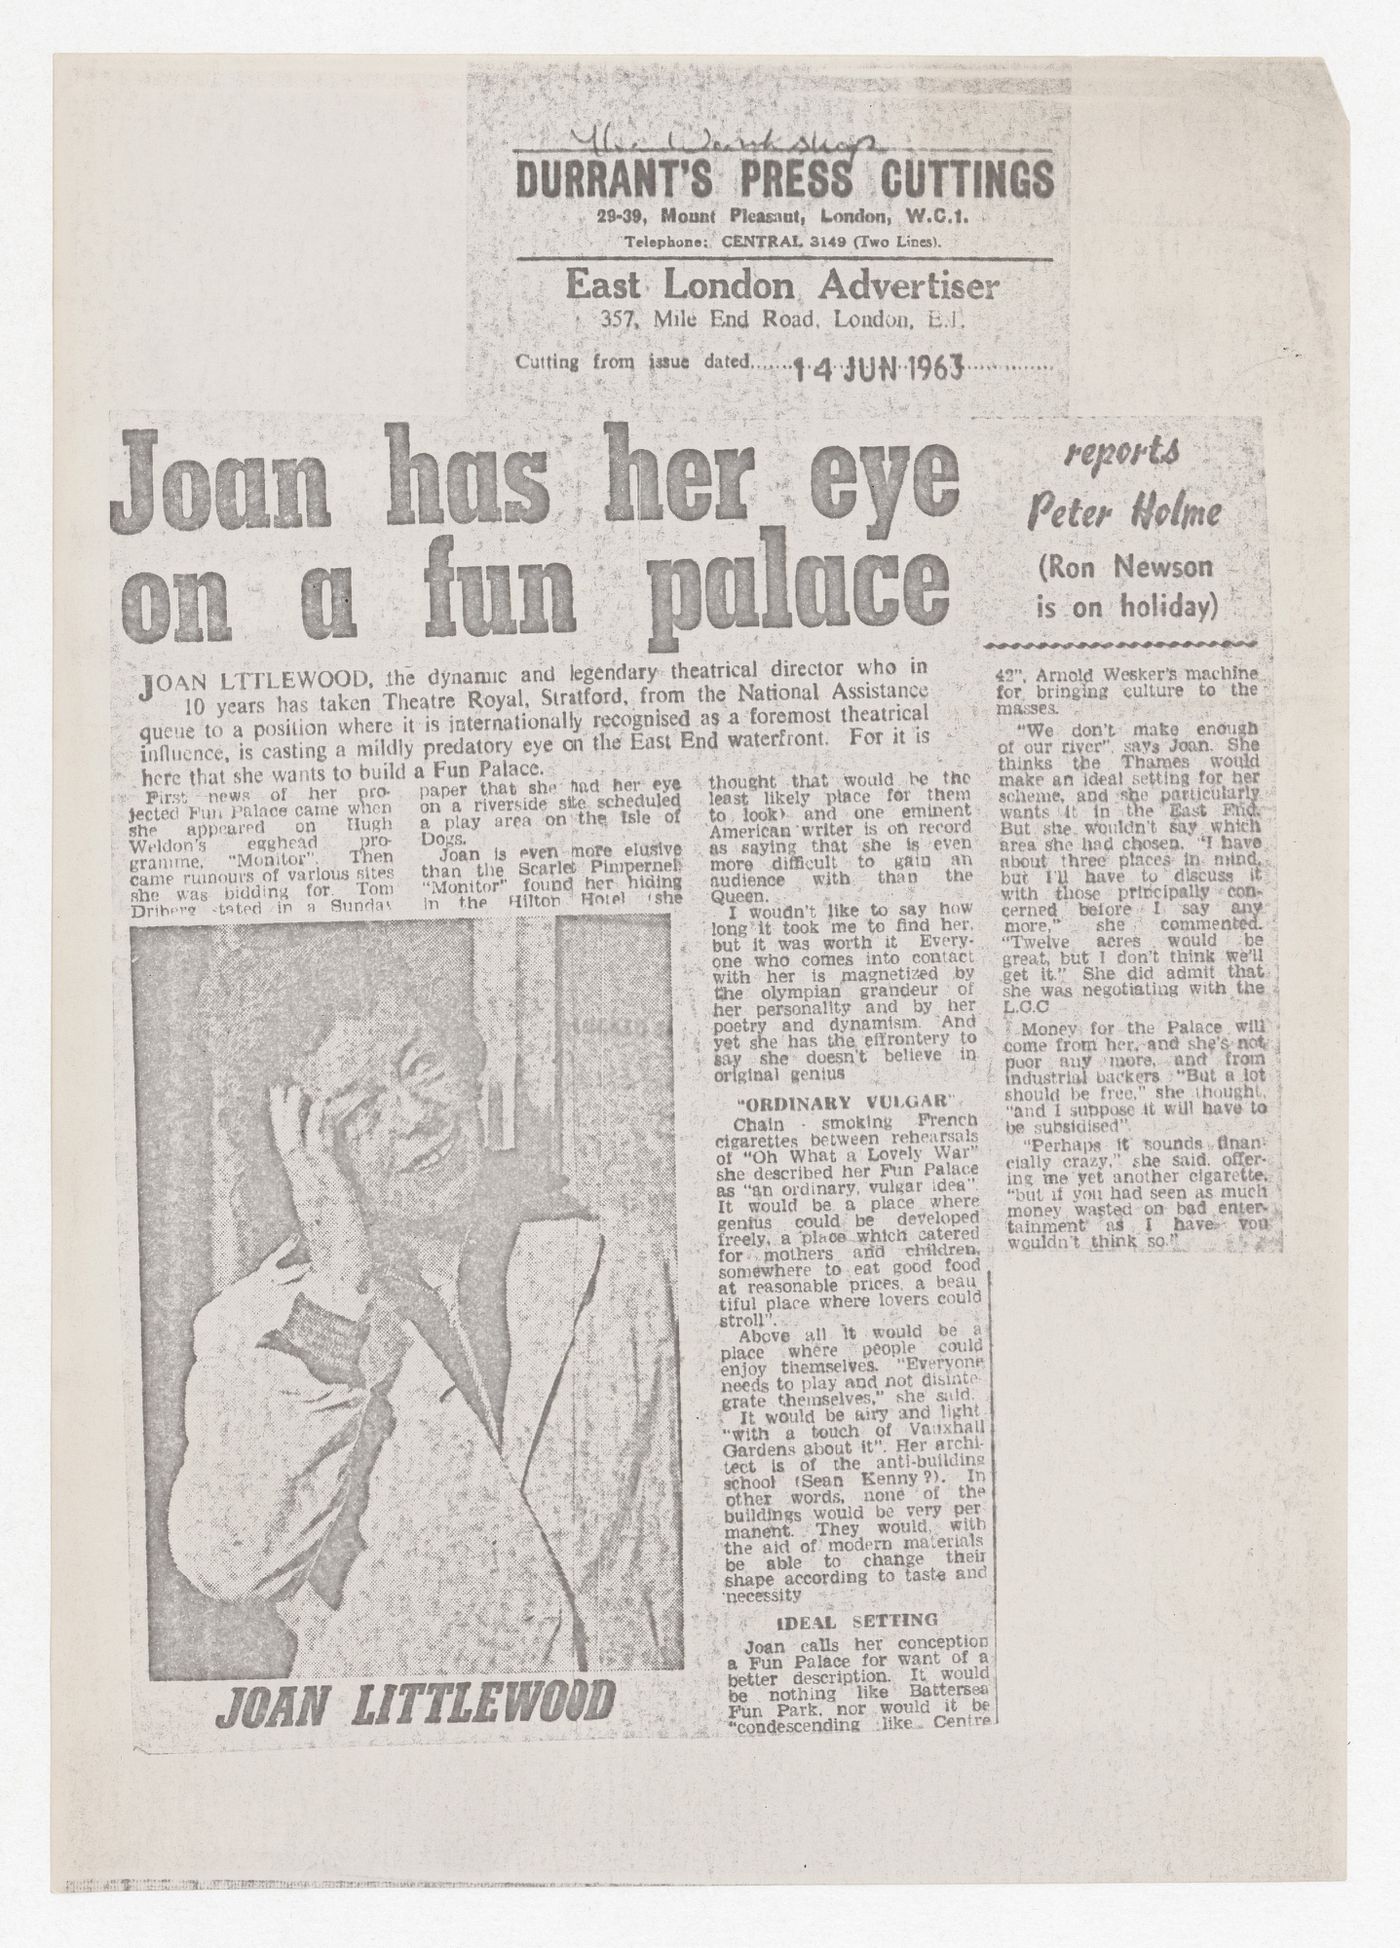 Copy of article "Joan has her eye on a fun palace", East London Advertiser, 14 June 1963